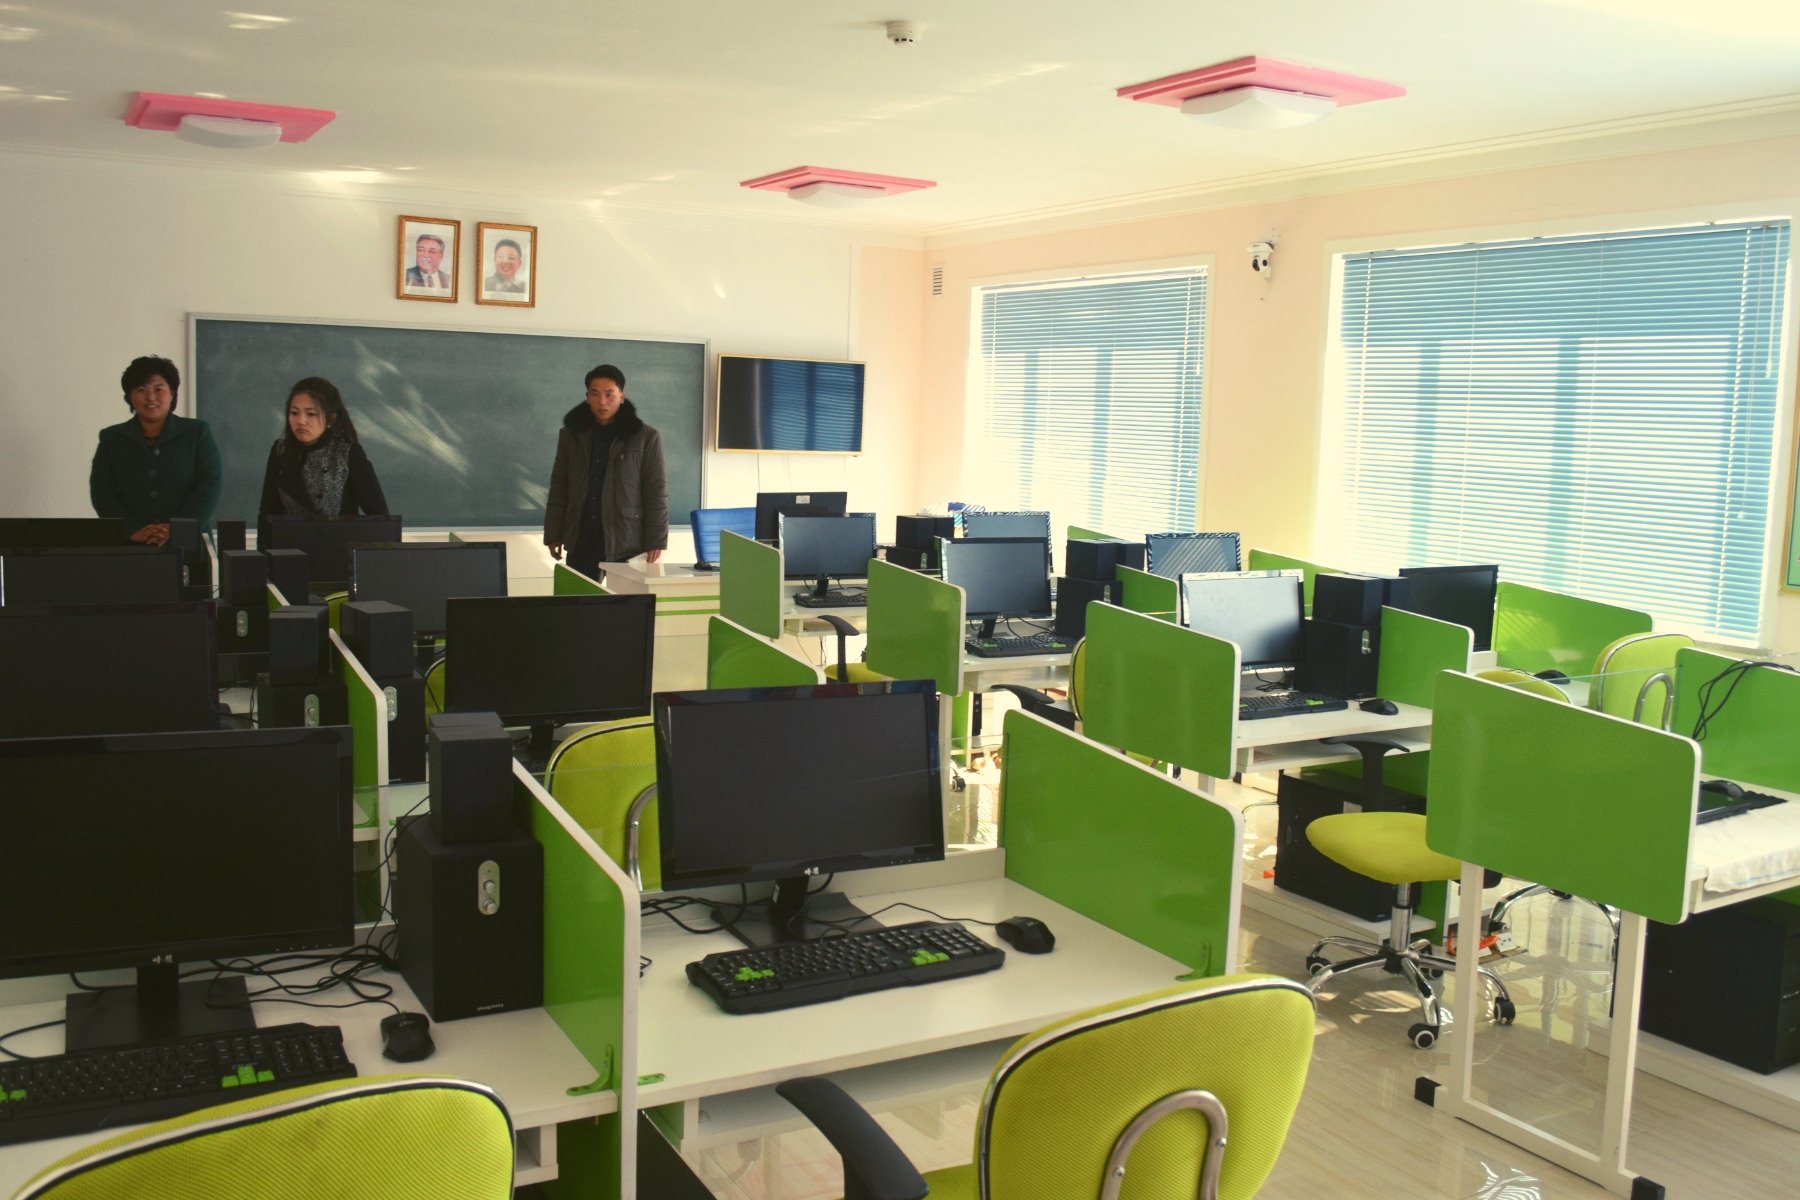 Computer room in an orphanage in North Korea (DPRK). Visit arranged by KTG